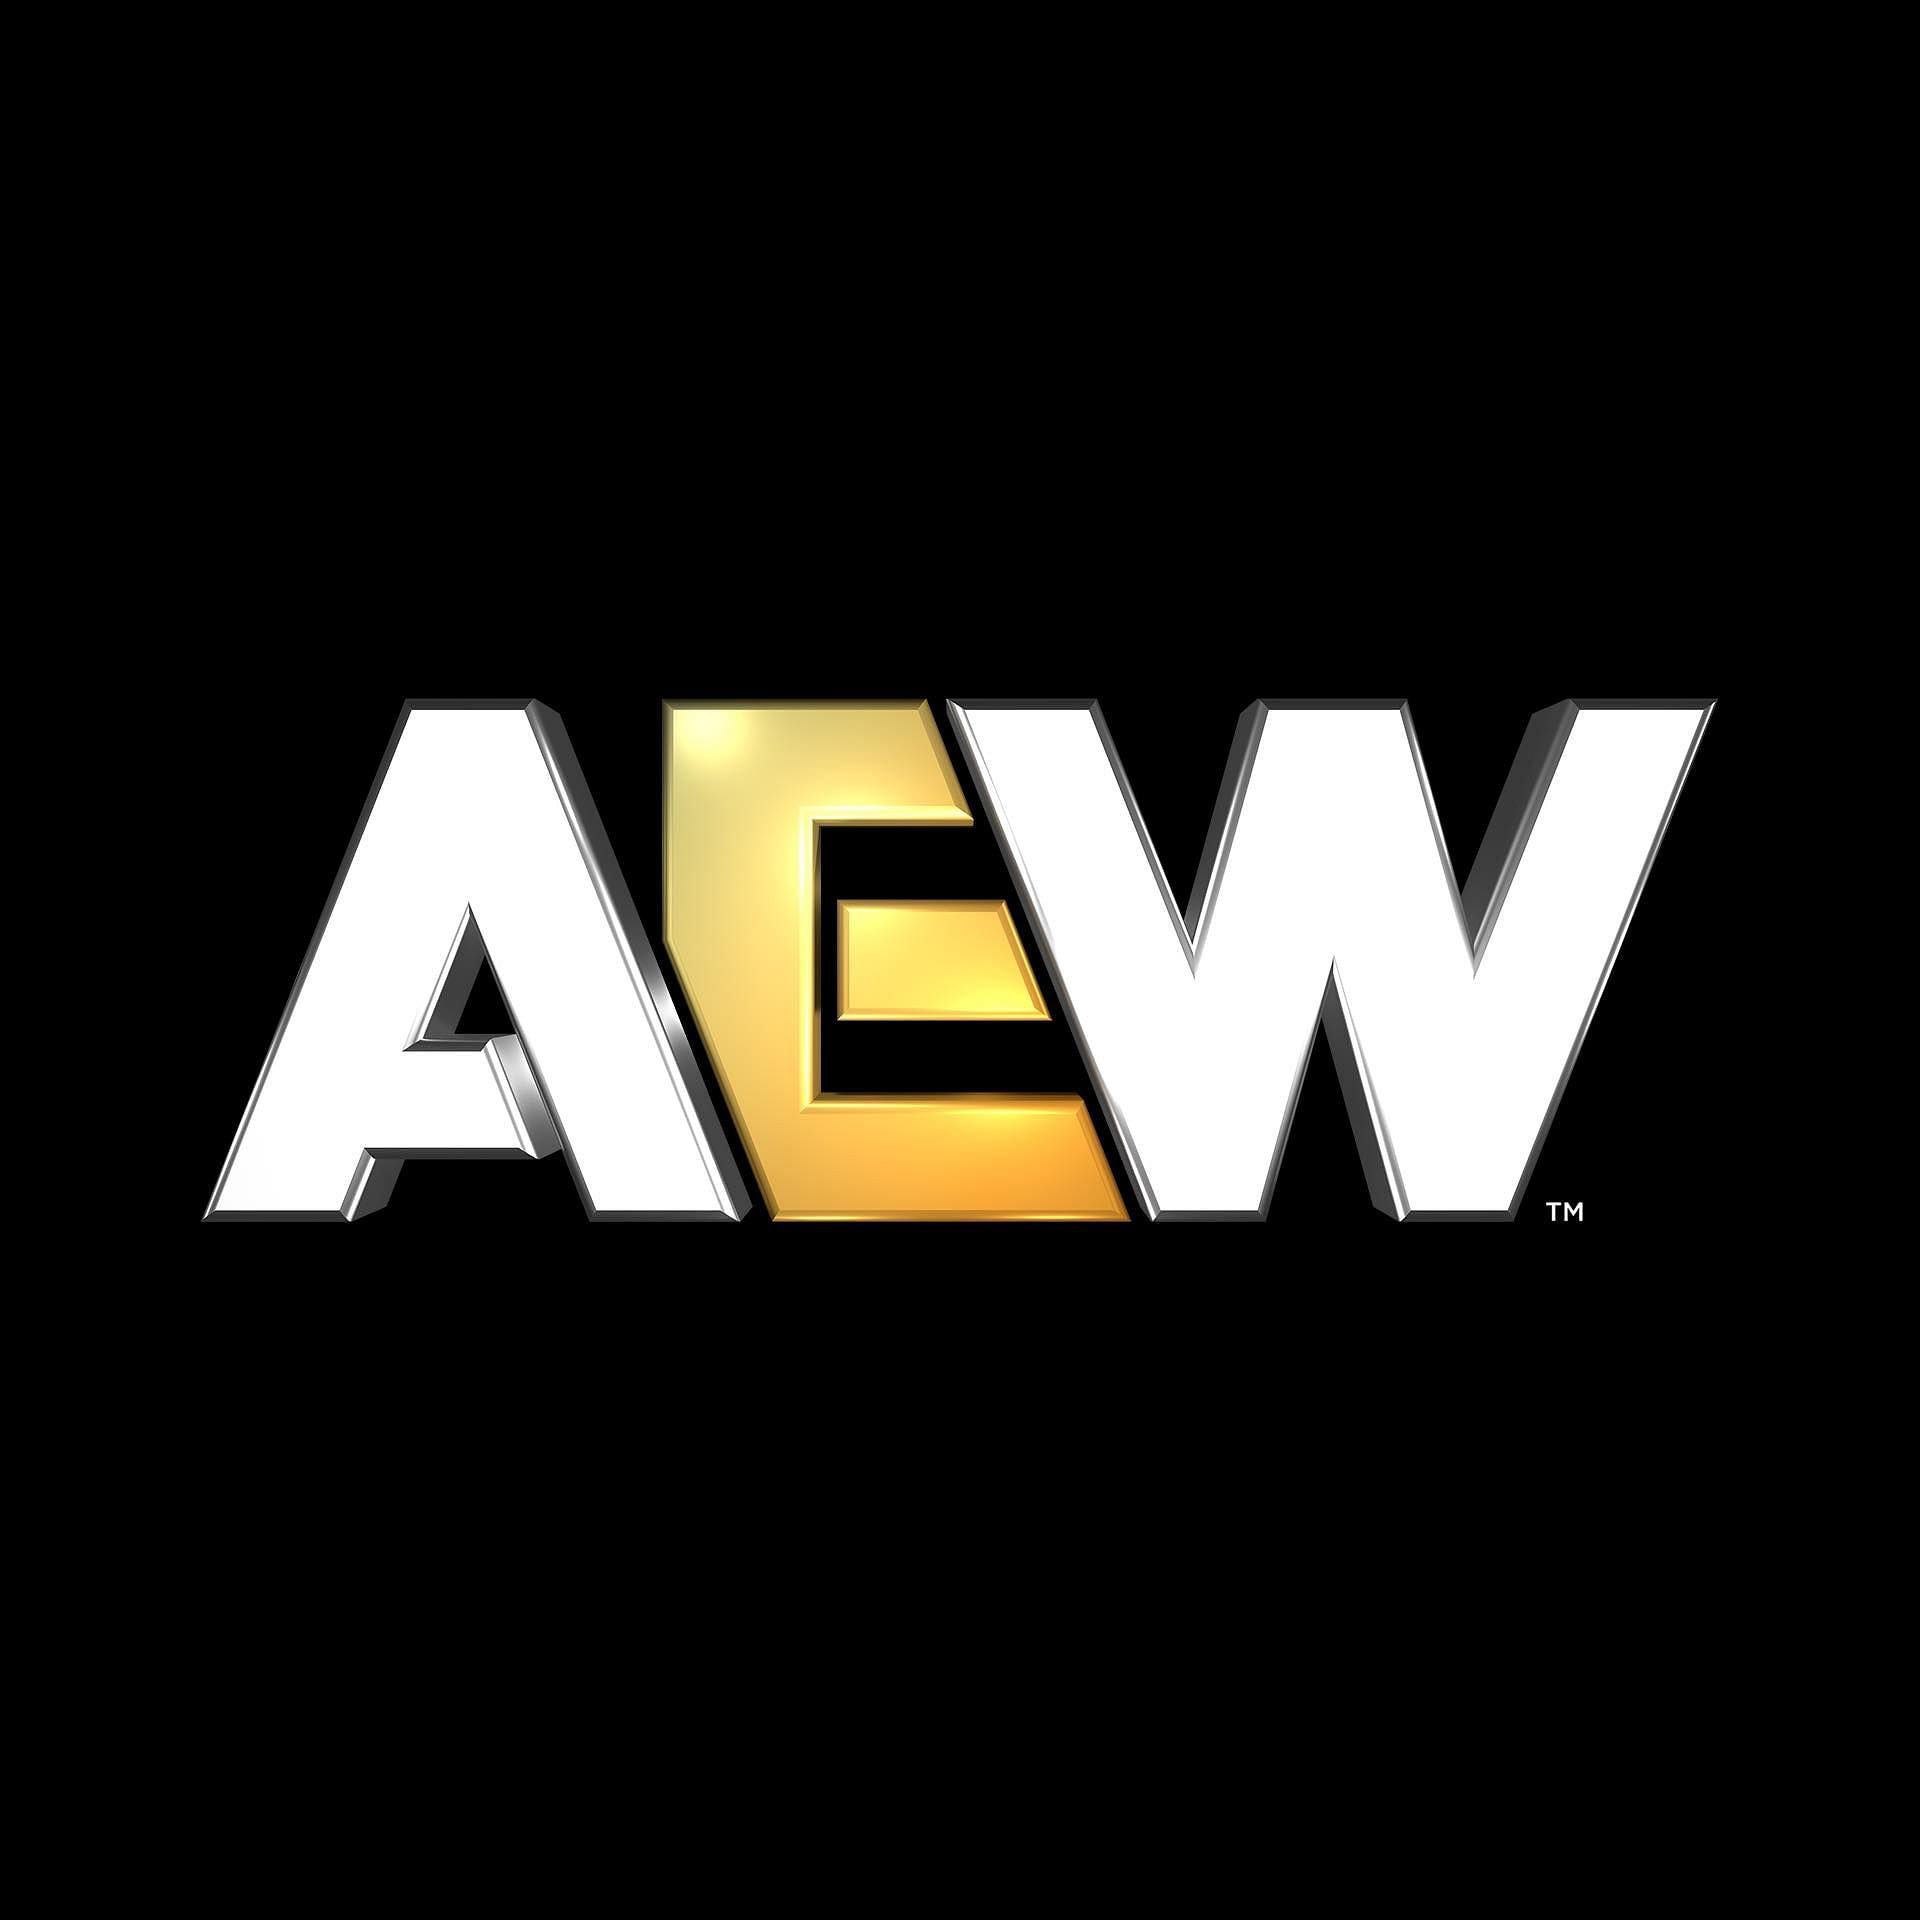 AEW match announced for new star